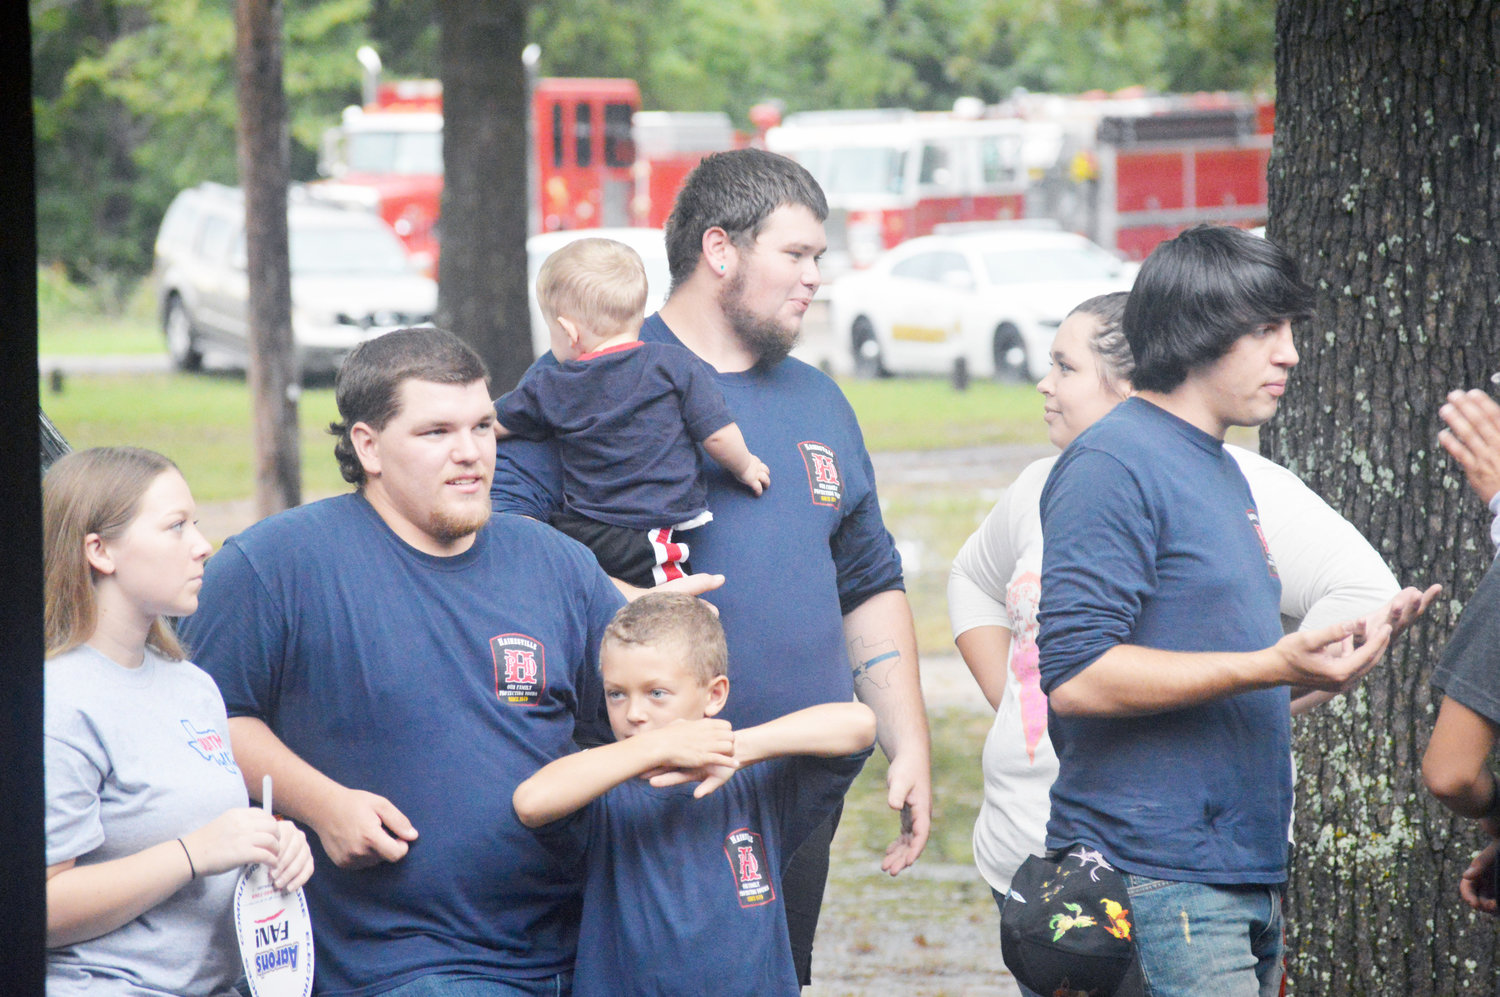 Members of the Hainesville Volunteer Fire Department are shown here with family members at the appreciation cook-out held at Jim Hogg City Park in Quitman Thursday evening.